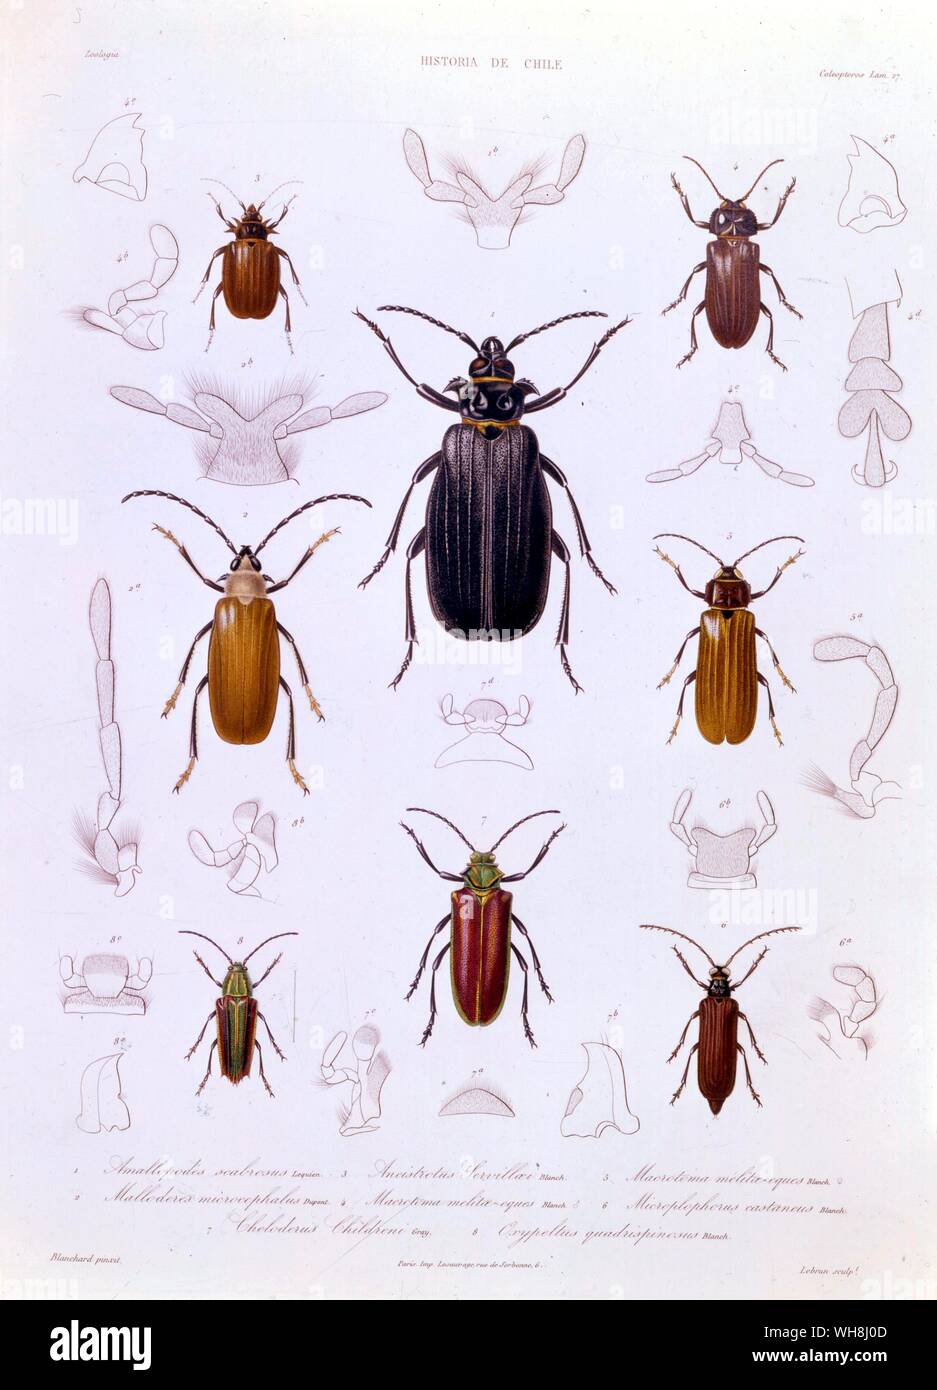 A collection of coleoptera found in Chile. From Darwin and the Beagle by Alan Moorhead, page 162. Stock Photo